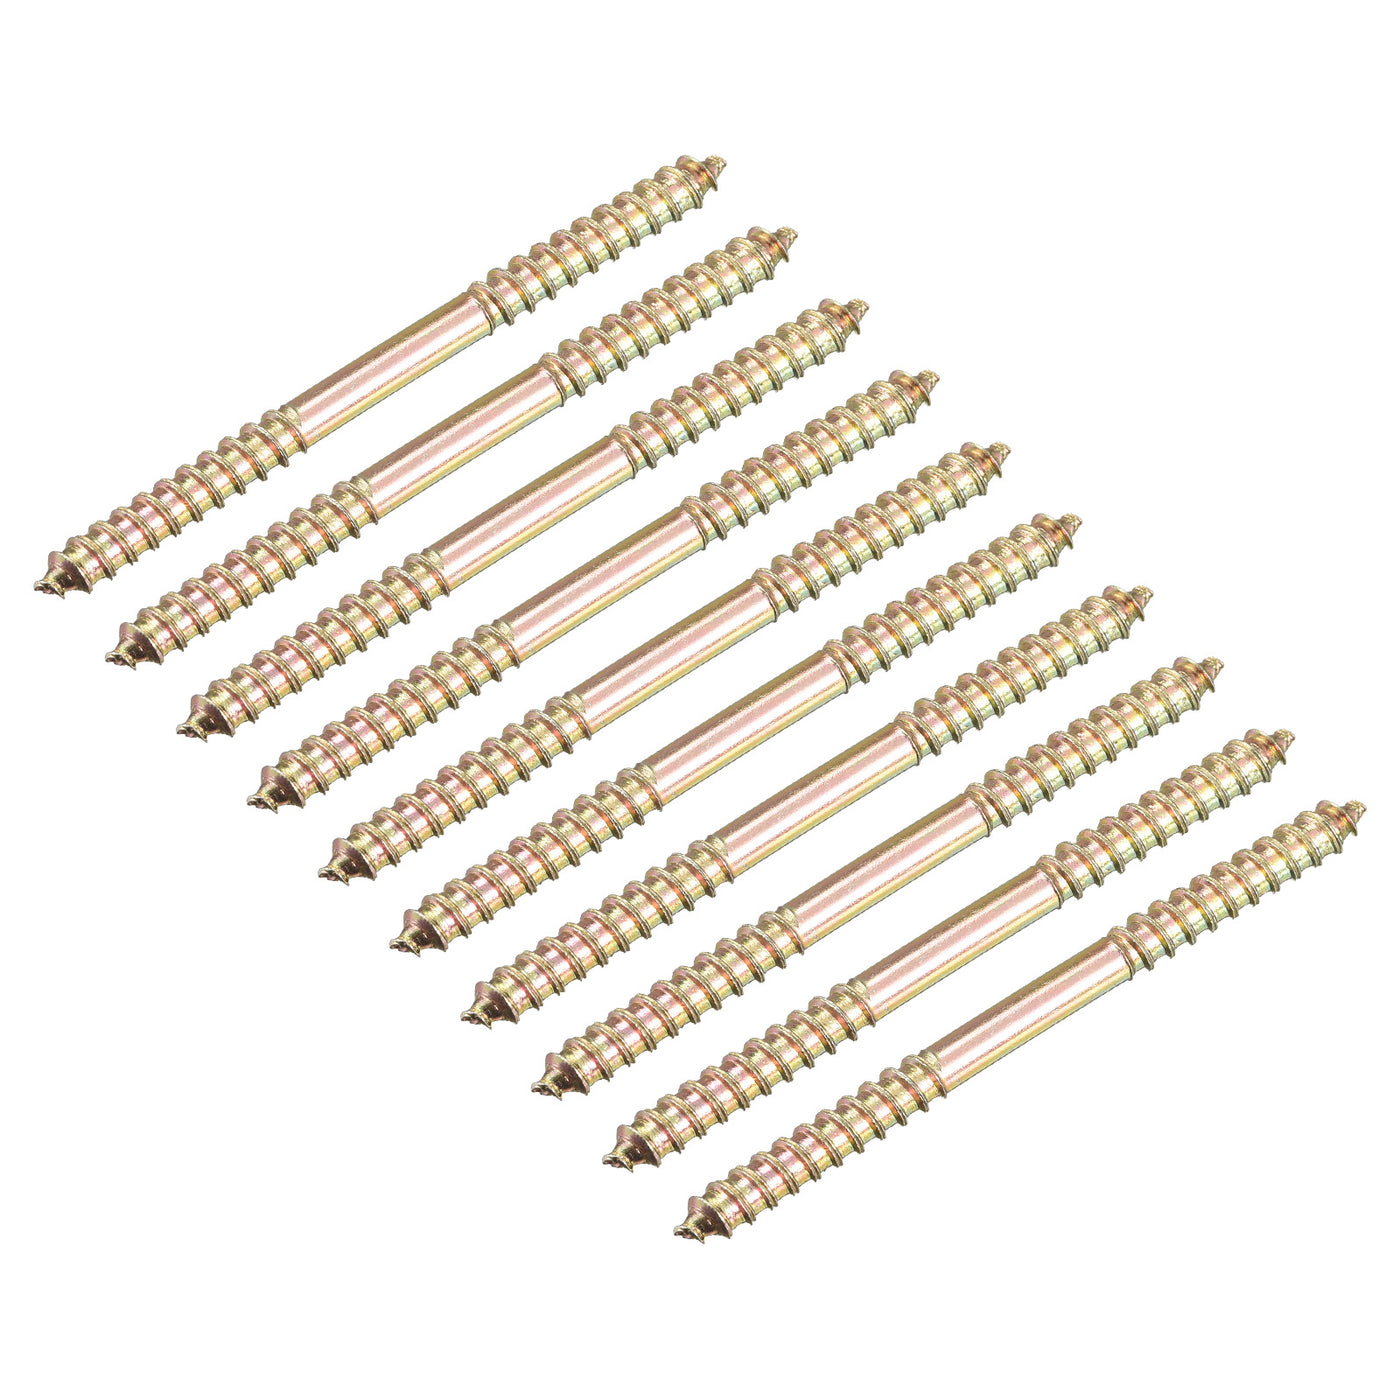 Uxcell Uxcell 5x65mm Hanger Bolts, 12pcs Double Ended Thread Wood to Wood Dowel Screws